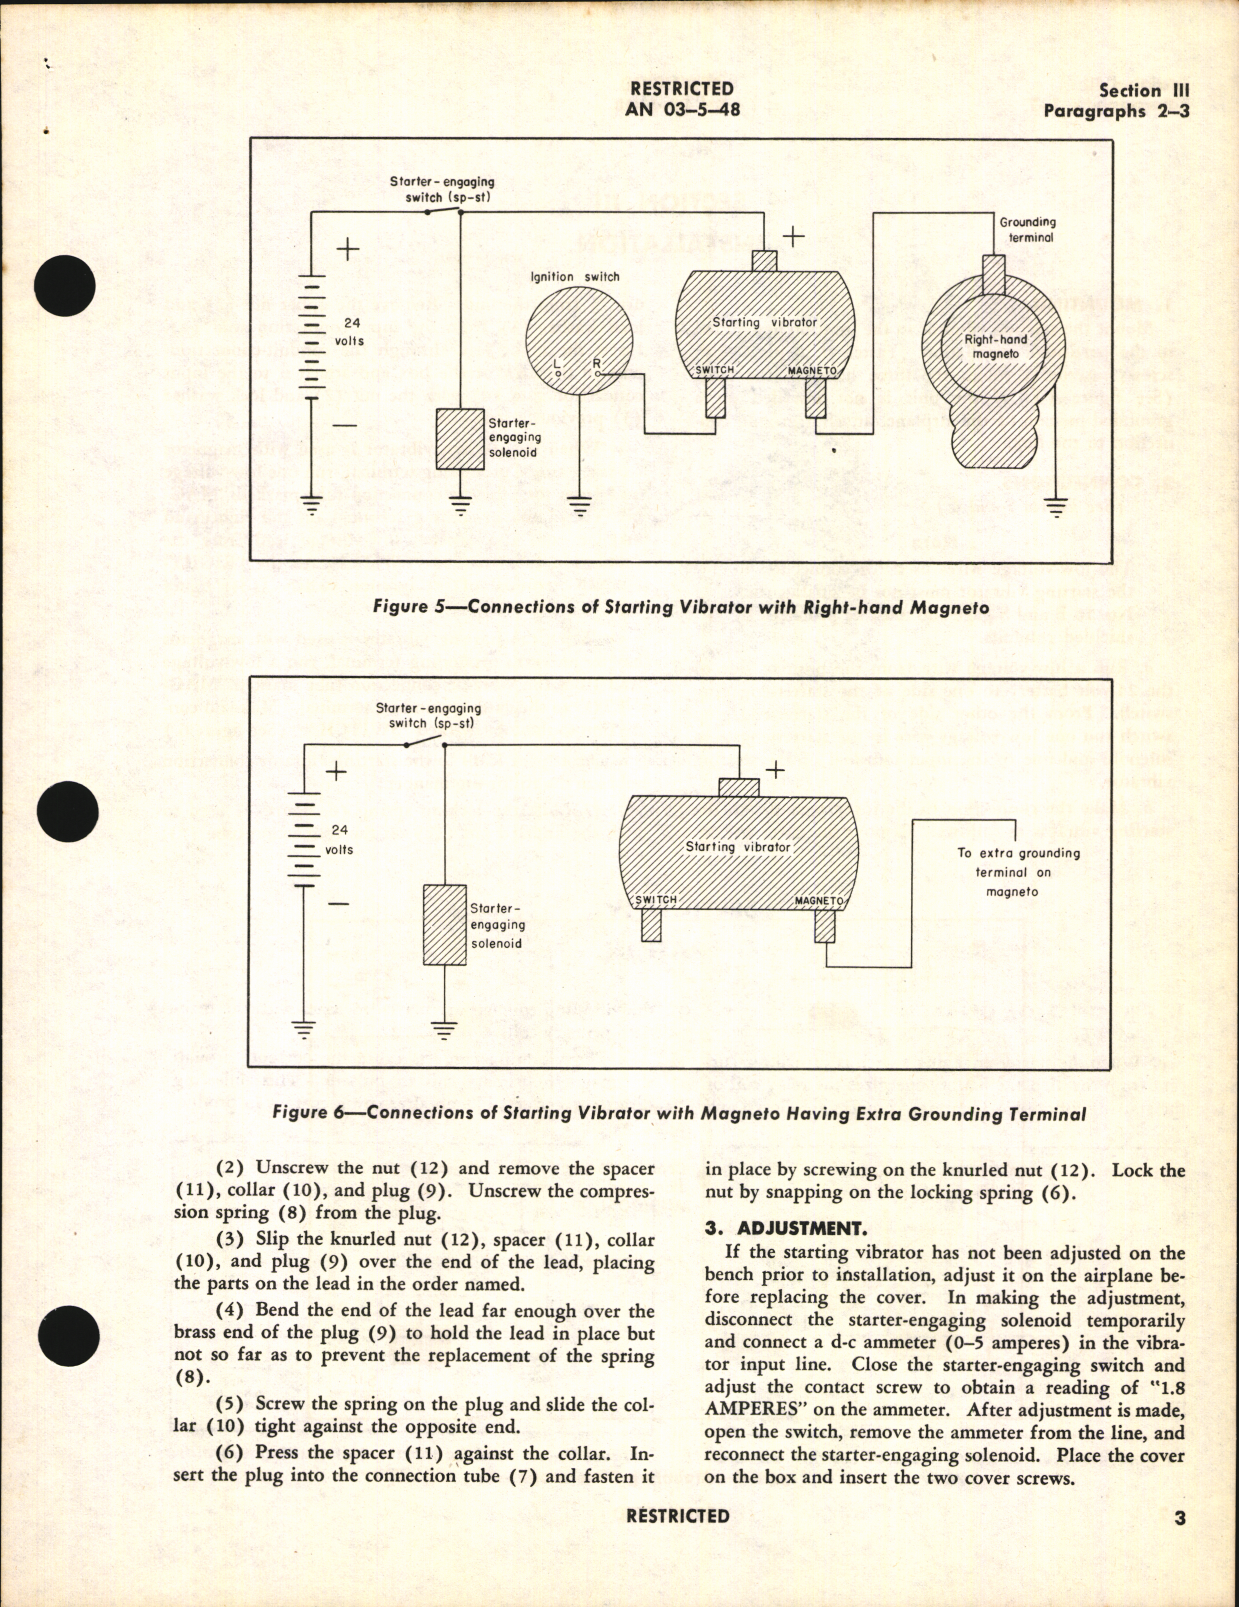 Sample page 7 from AirCorps Library document: Handbook of Instructions with Parts Catalog for Starting Vibrators 70G7 and 70G7G3